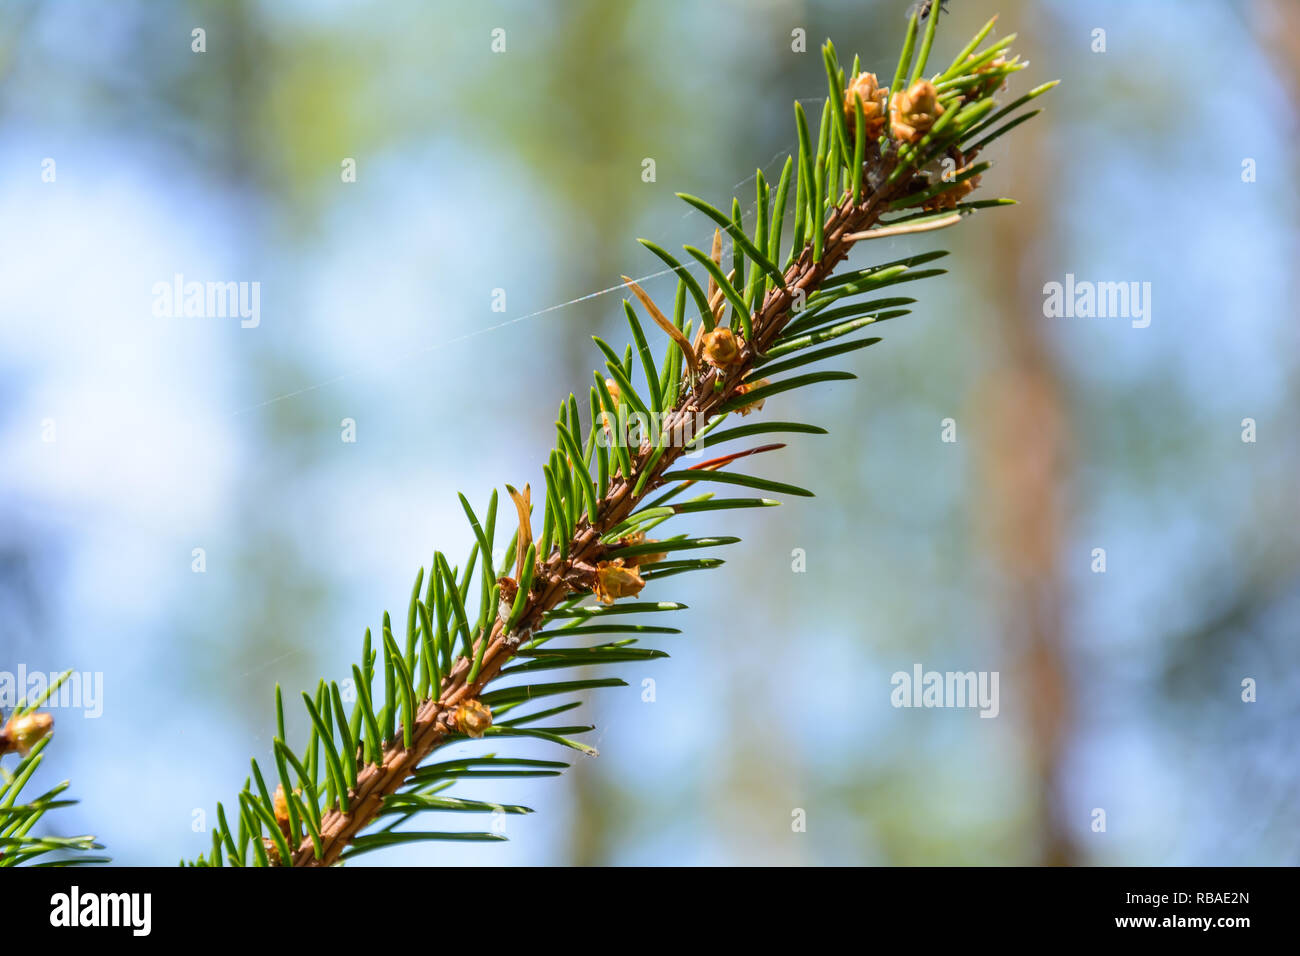 The appearance of cones on the branches of coniferous trees in the spring Stock Photo